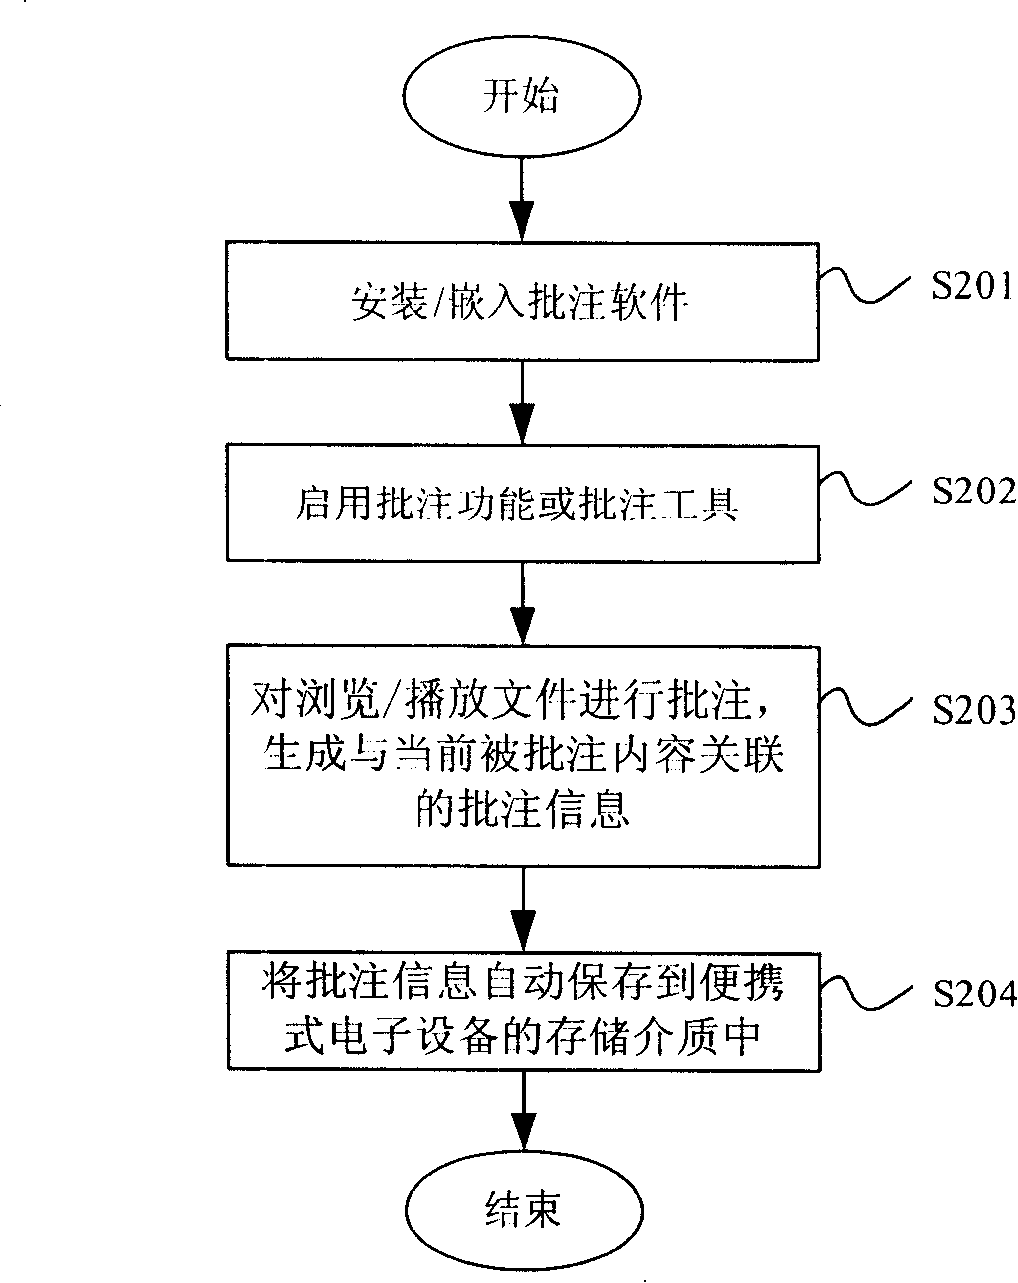 Method and system for annotations and commentaries of electric data in portable electronic equipment